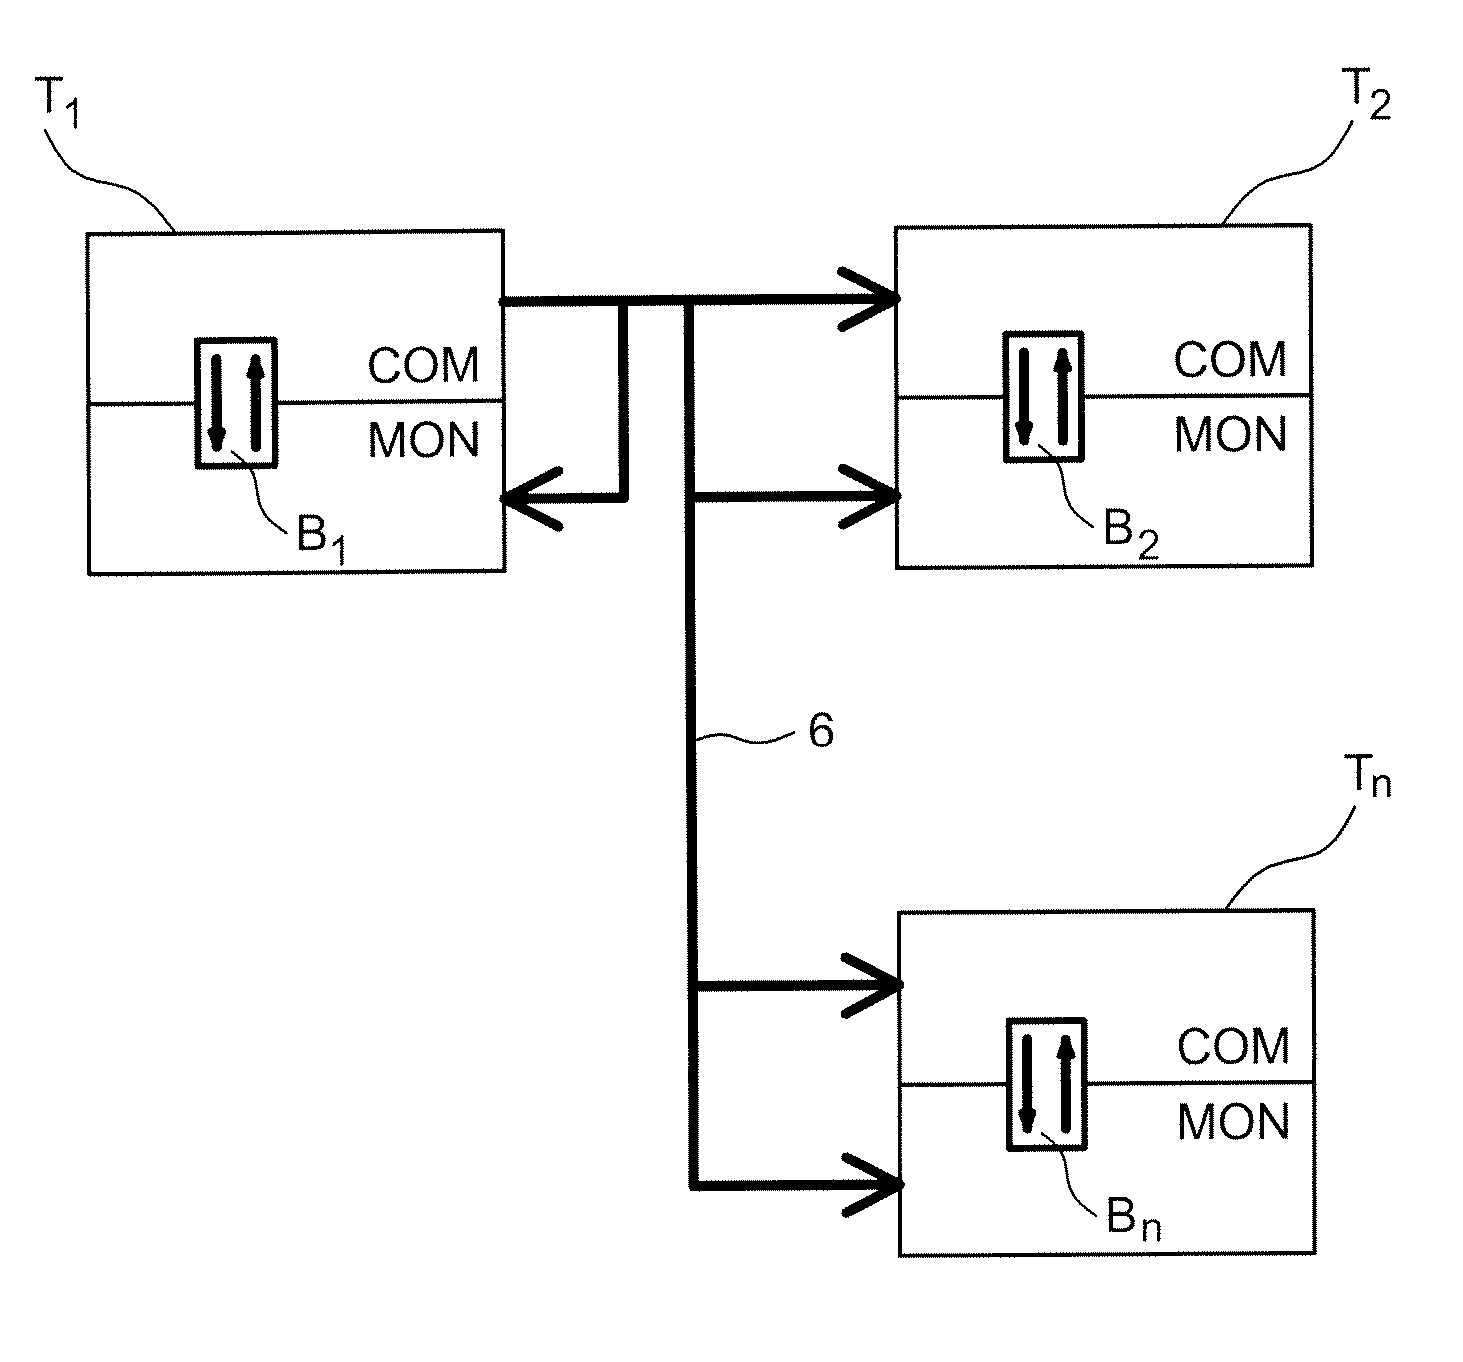 Method and device for consolidation by software synchronisation in flight control computers